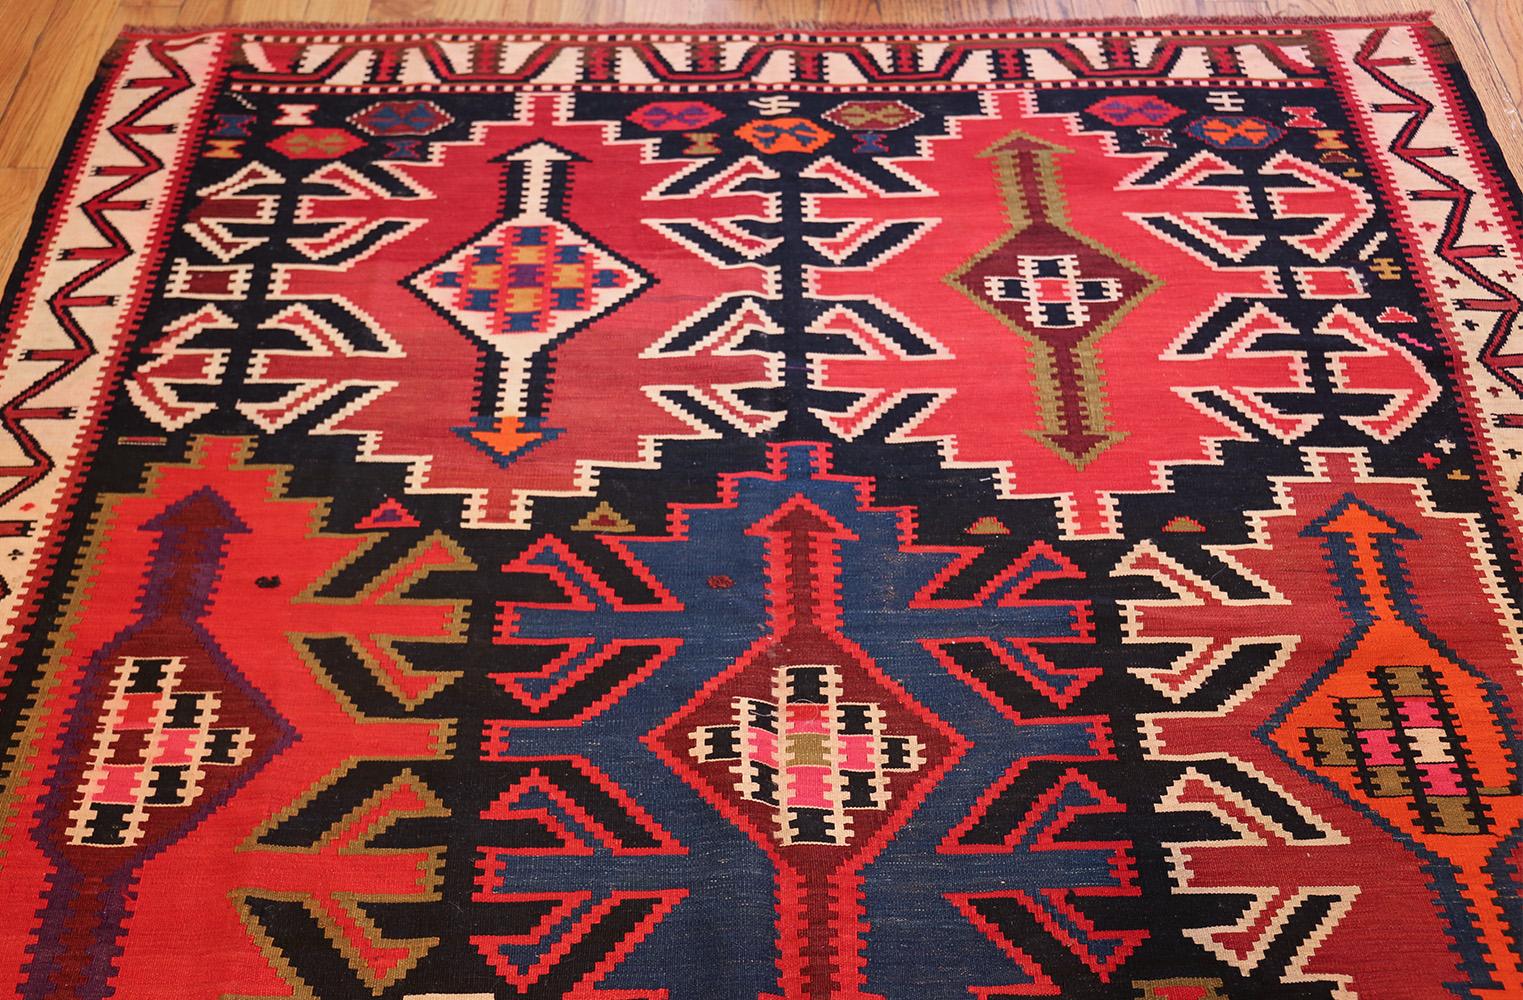 Hand-Woven Antique Tribal Caucasian Kuba Kilim Rug. Size: 5 ft 7 in x 12 ft 9 in